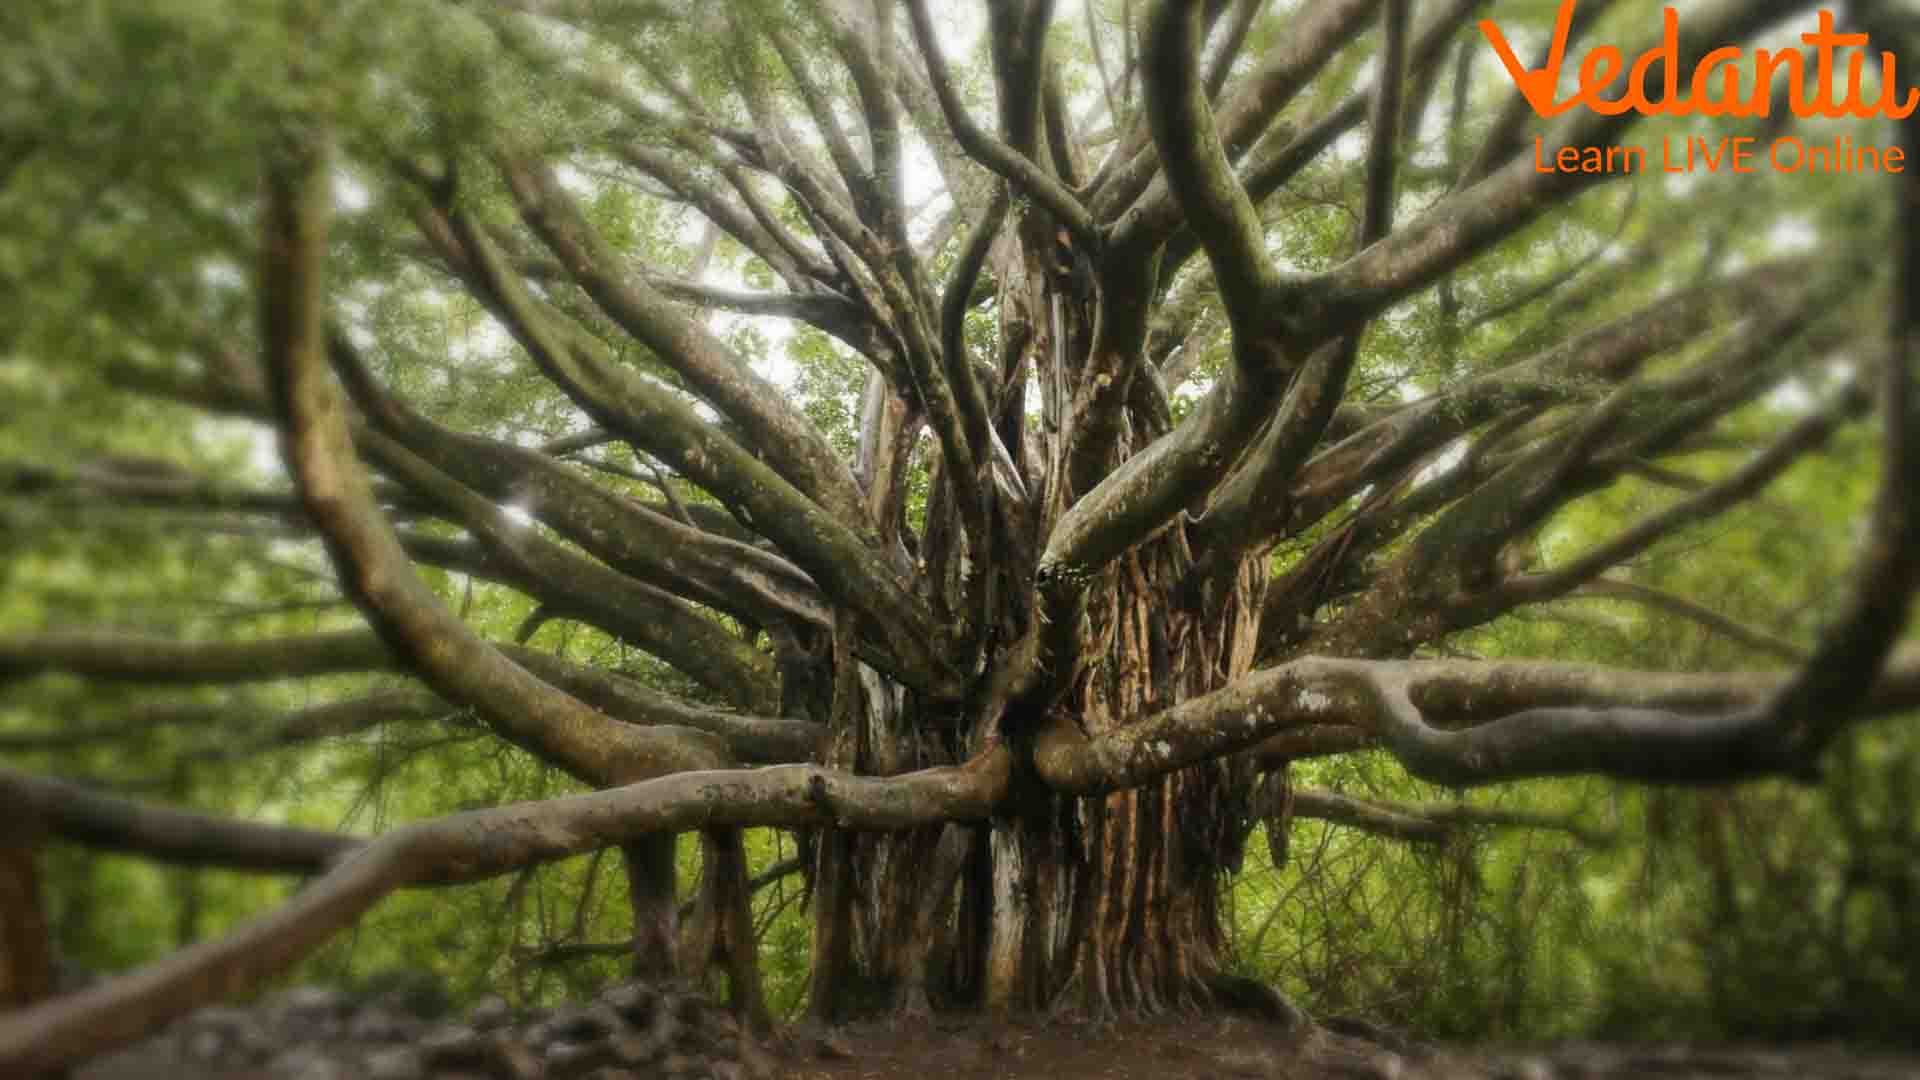 A mother tree in the forest